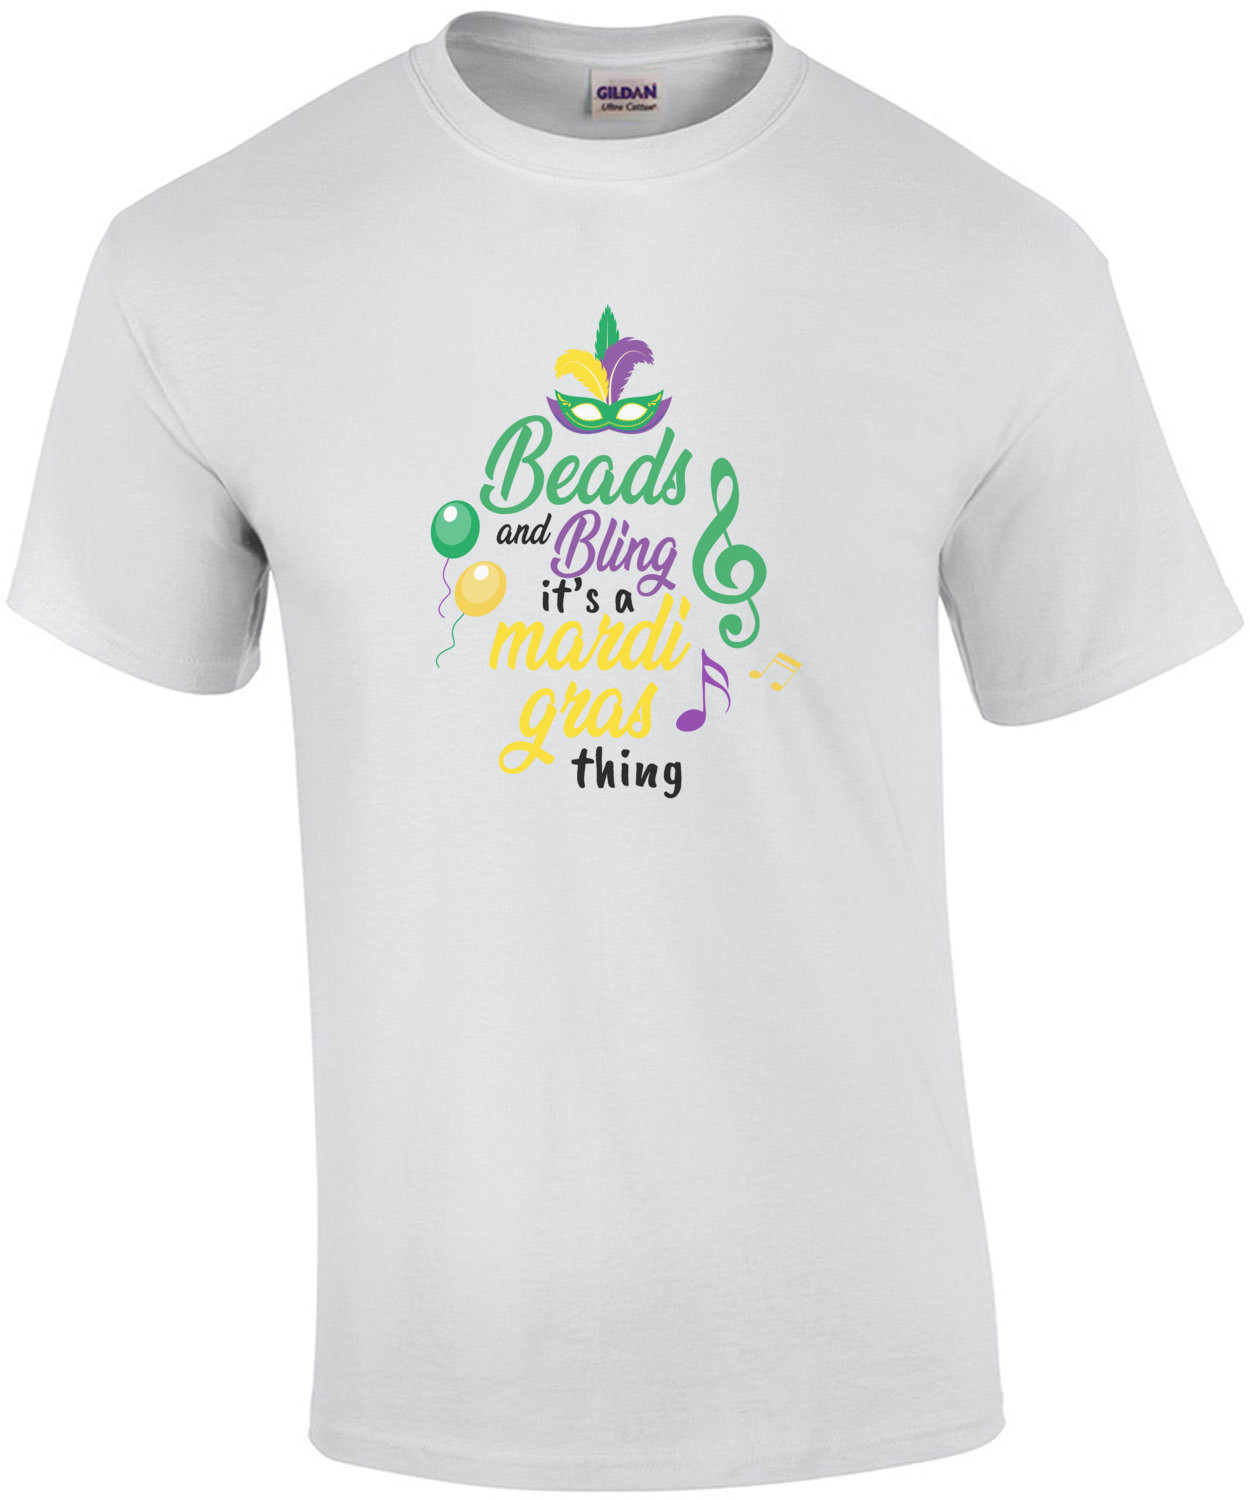 Beads and Bling - It's a mardi gras thing - New Orleans - louisiana t-shirt